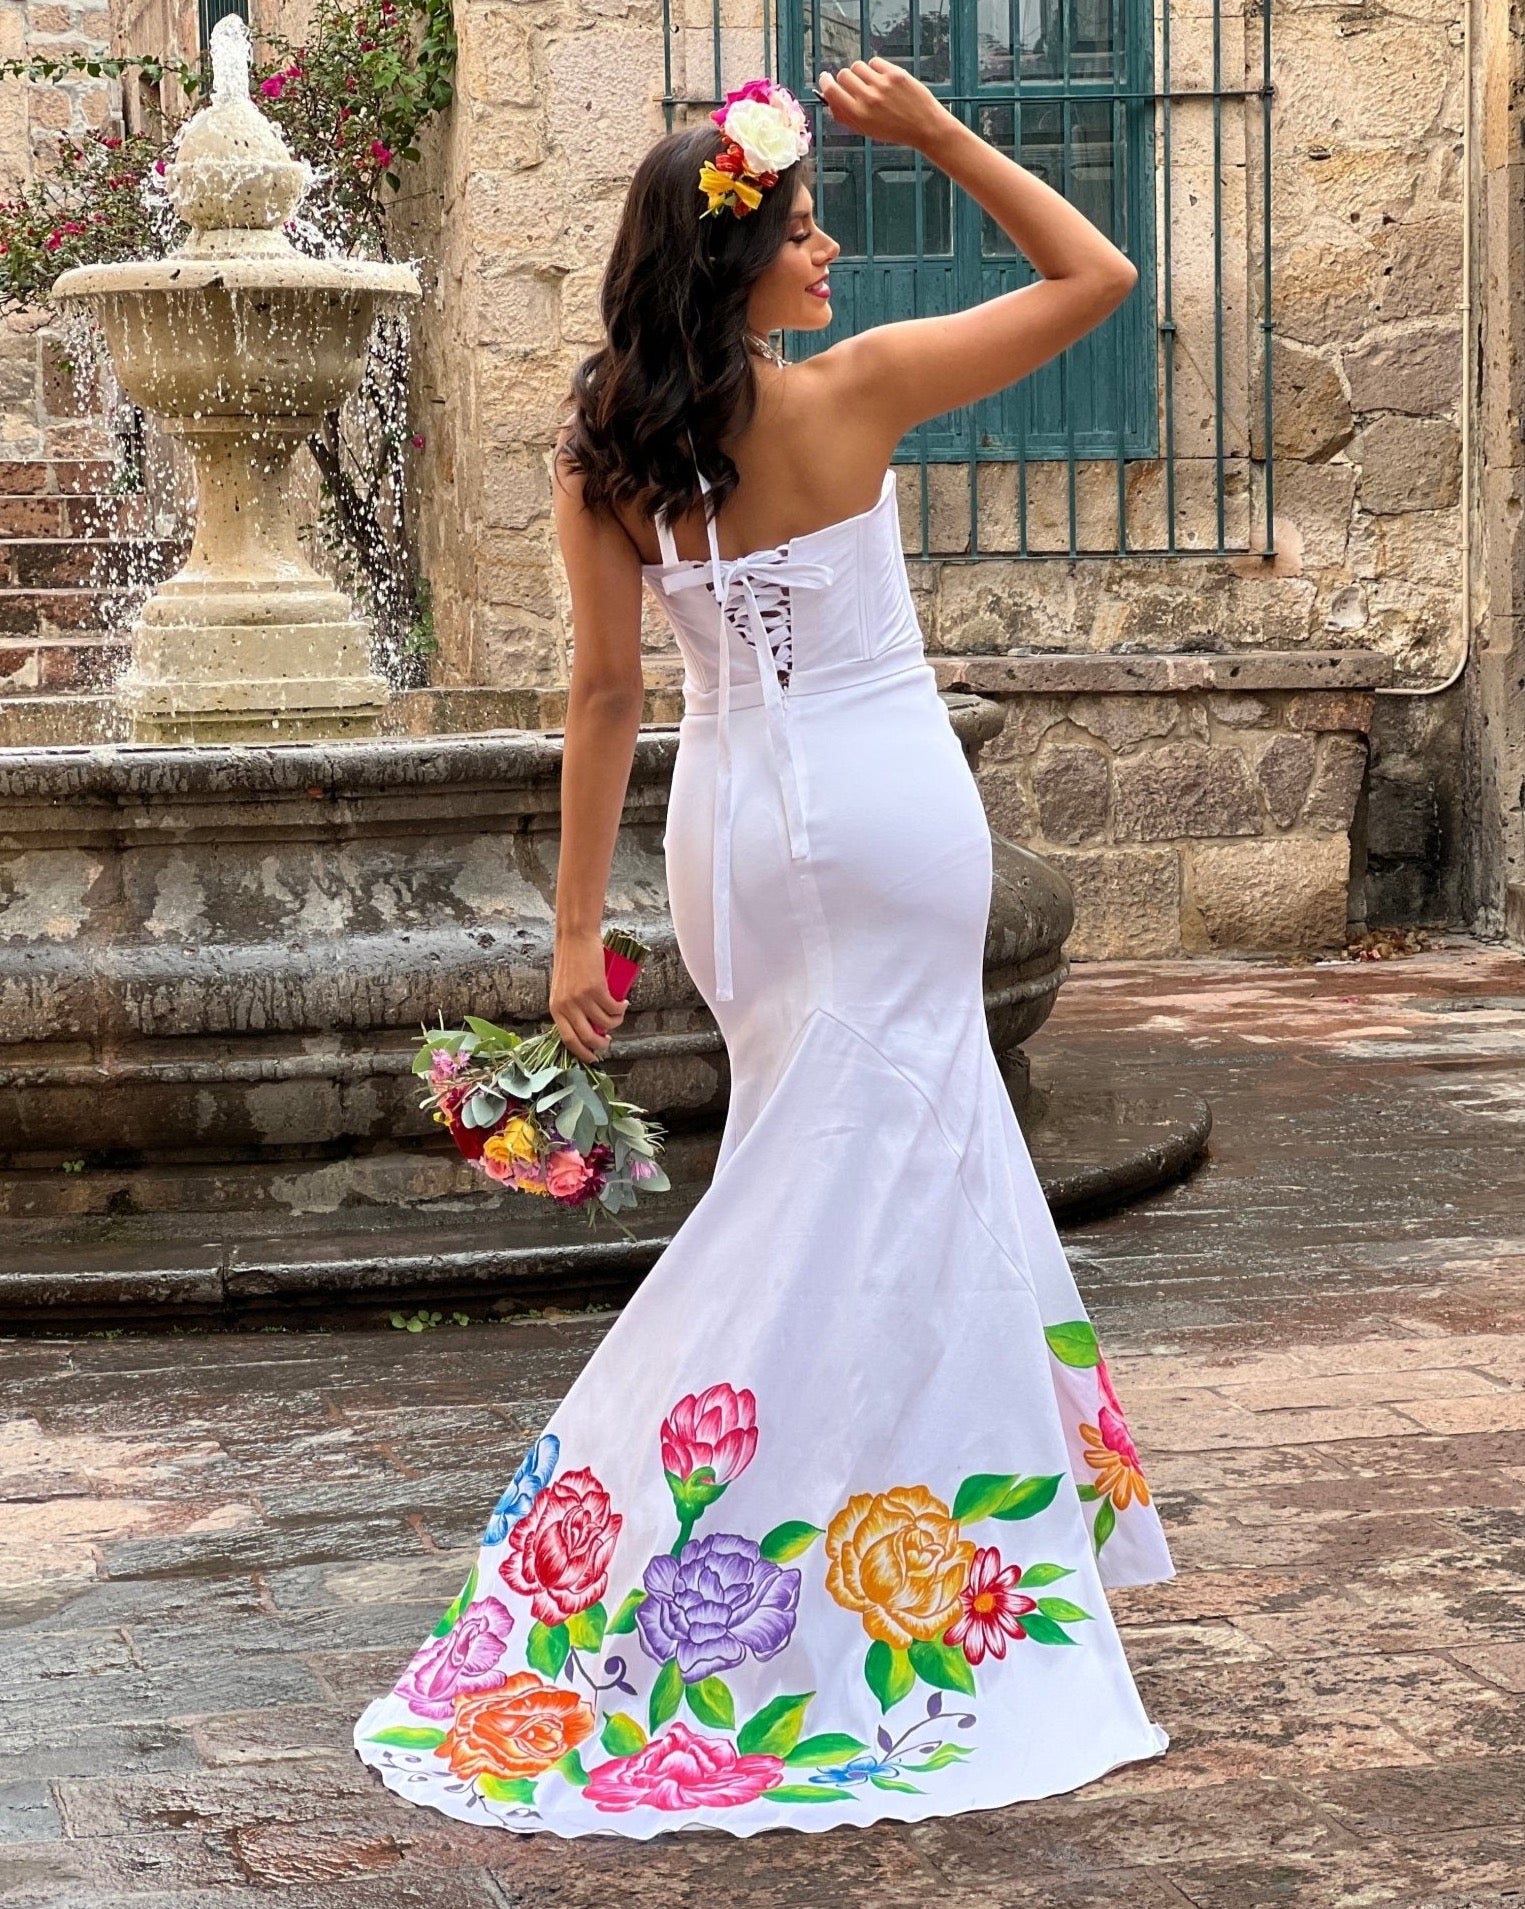 Mexican Hand Painted Wedding Dress in White